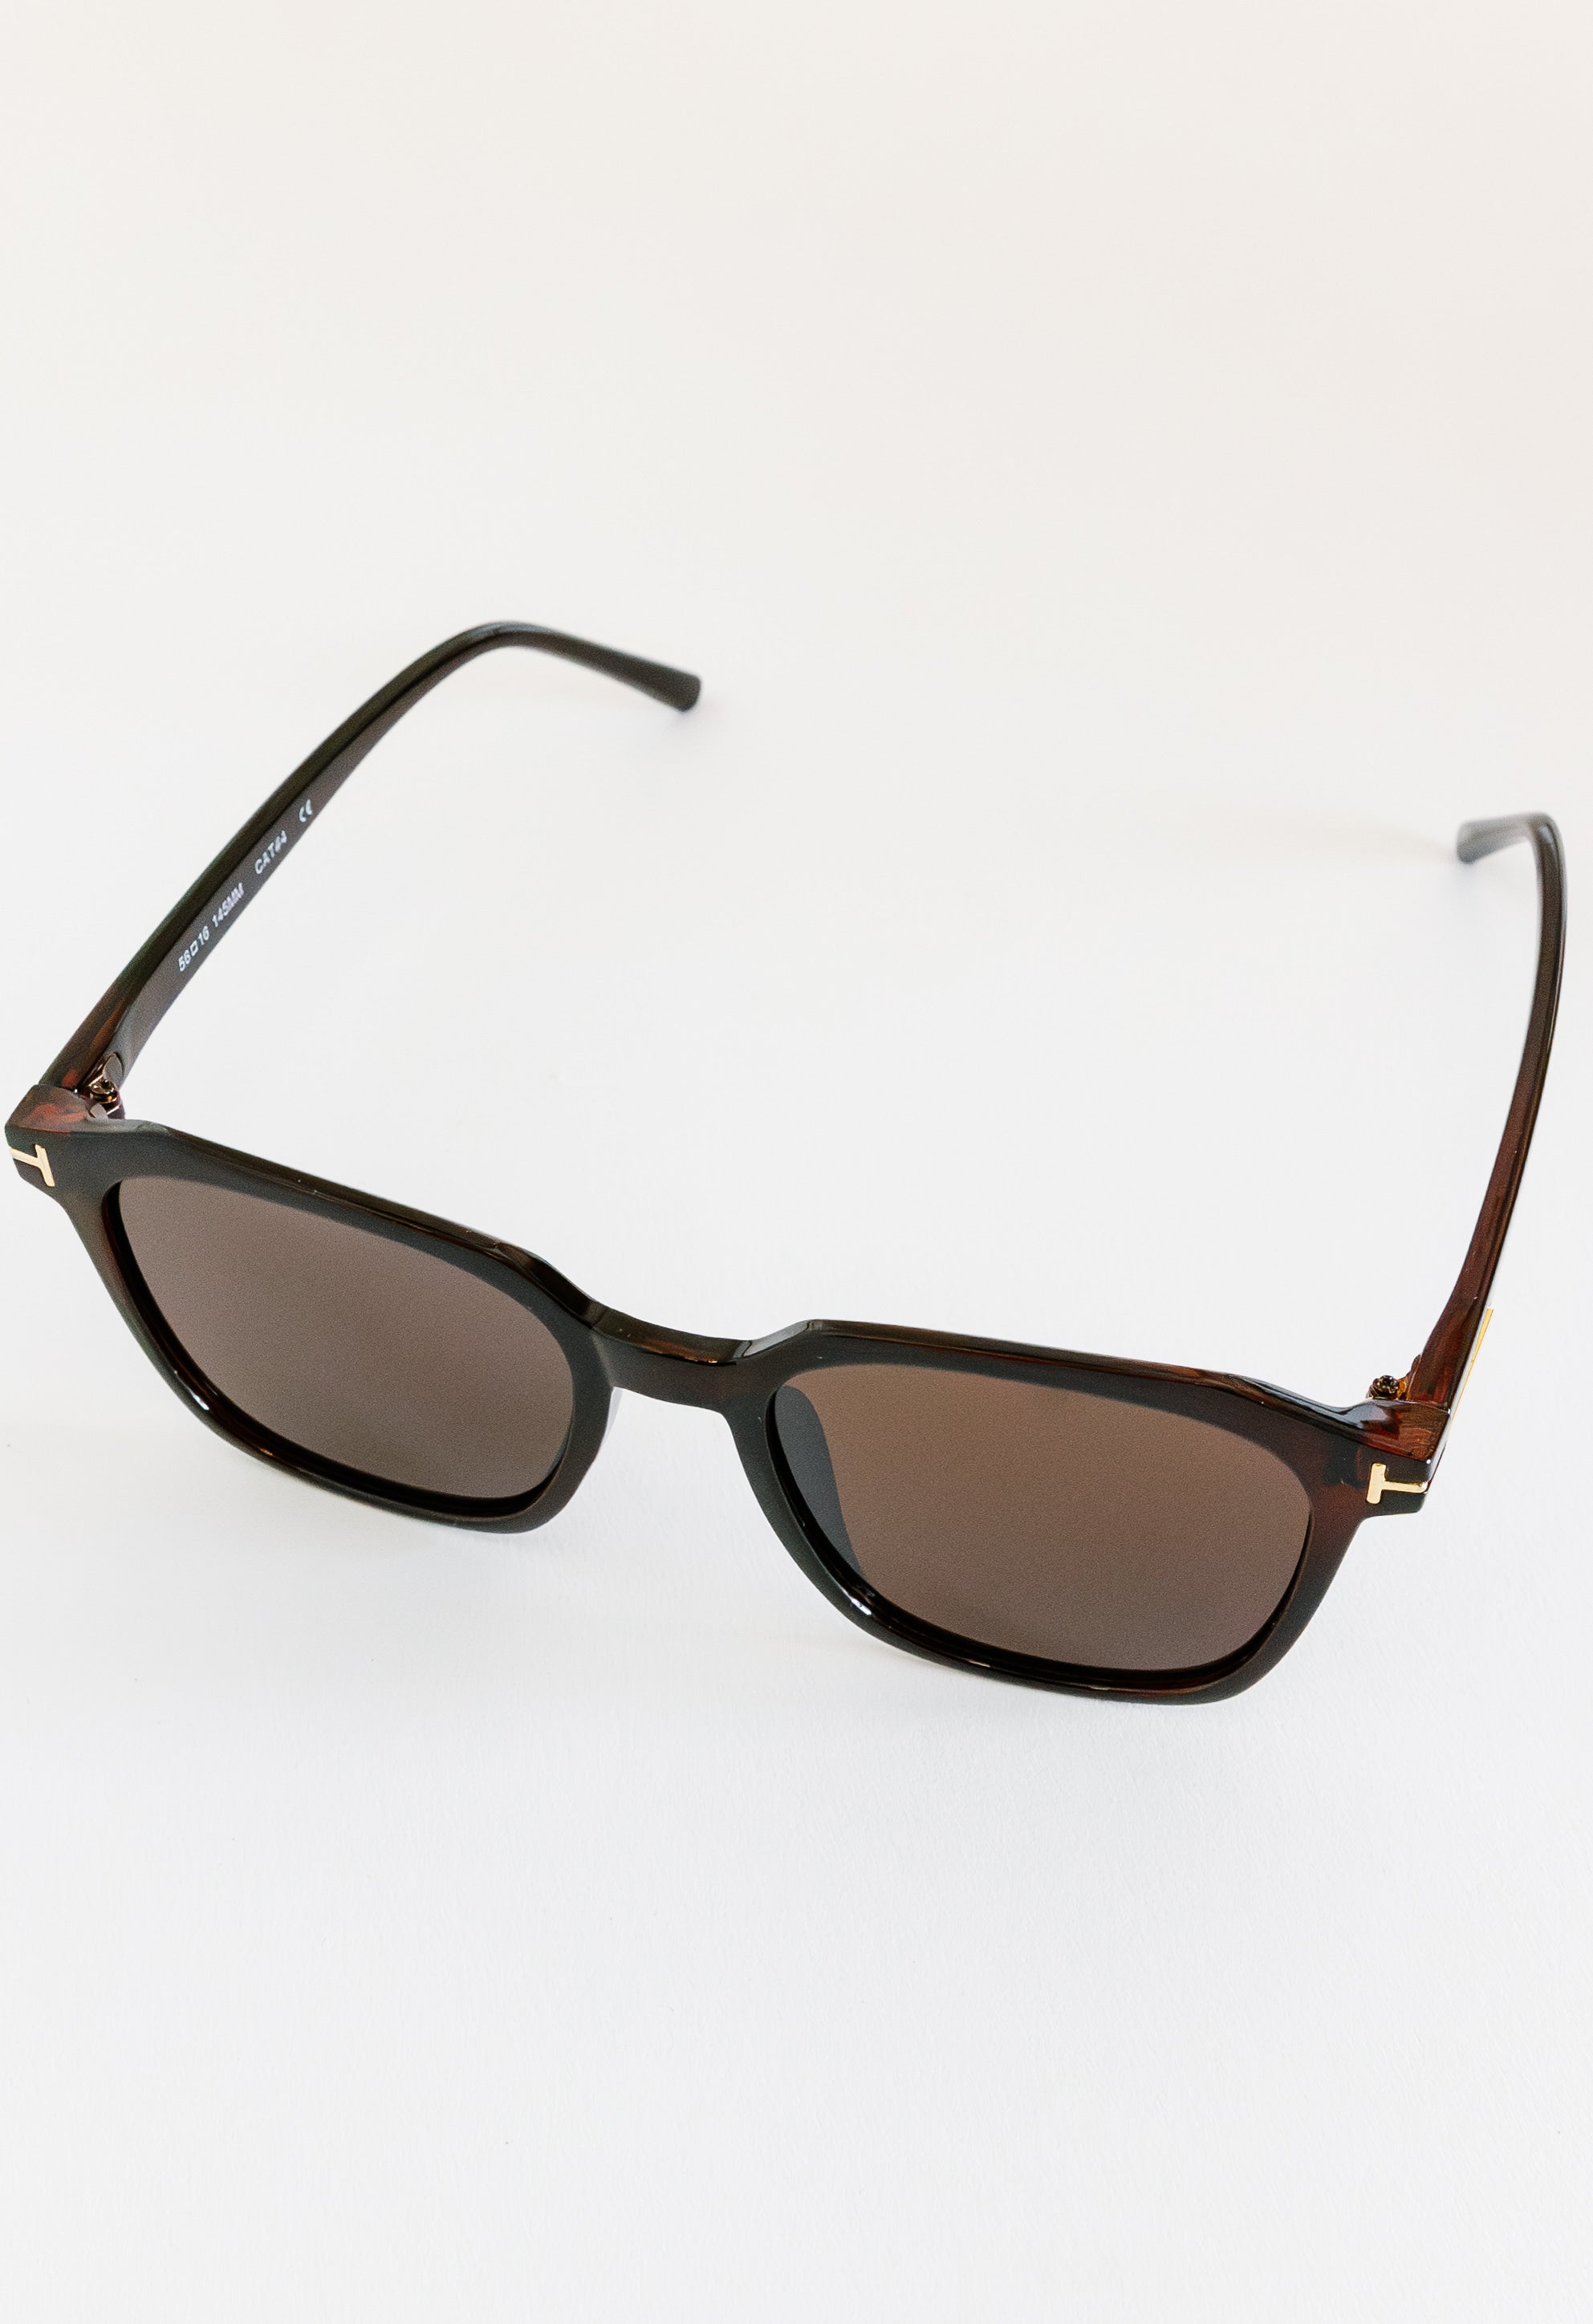 Maude Sunglasses - BROWN - willows clothing Sunglasses